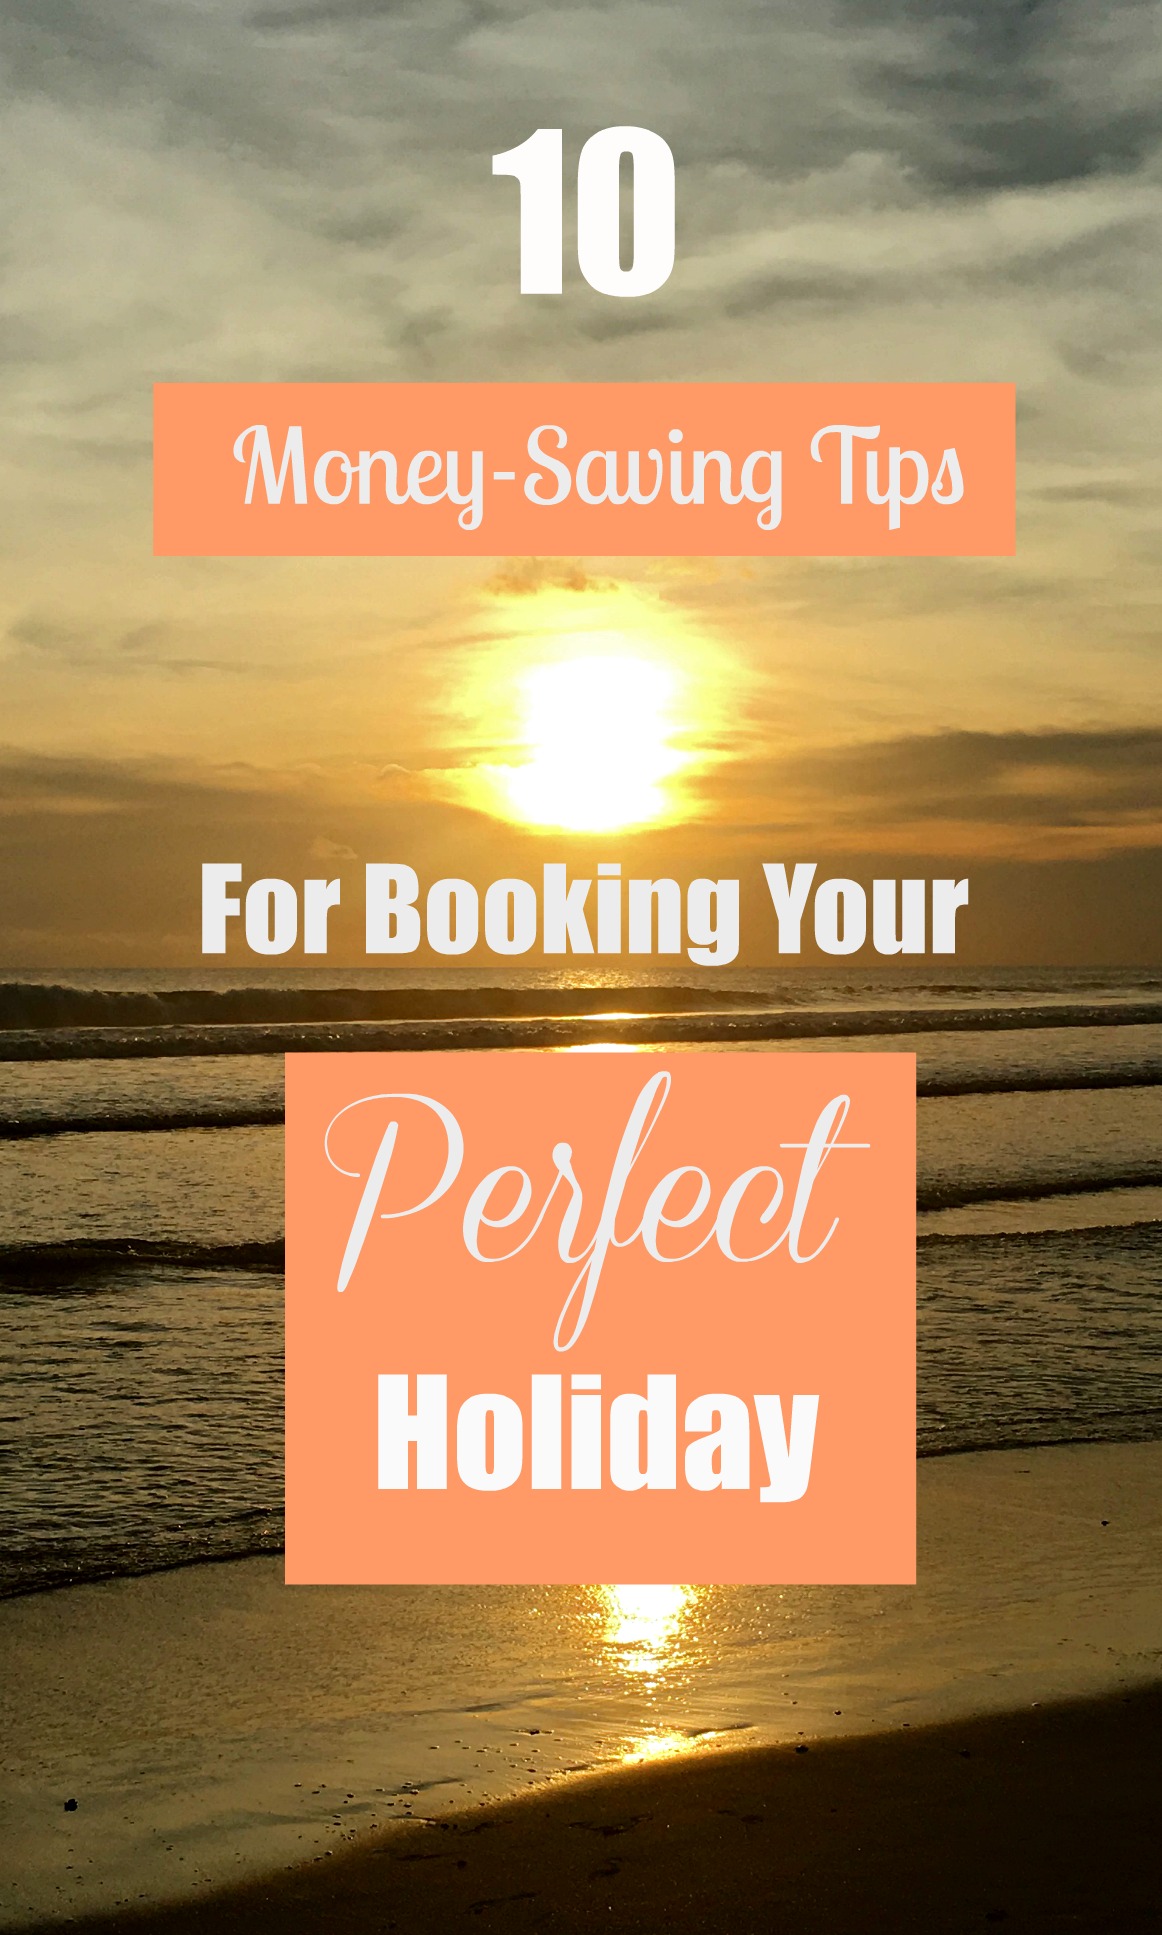 10 money-saving tips for booking your perfect holiday